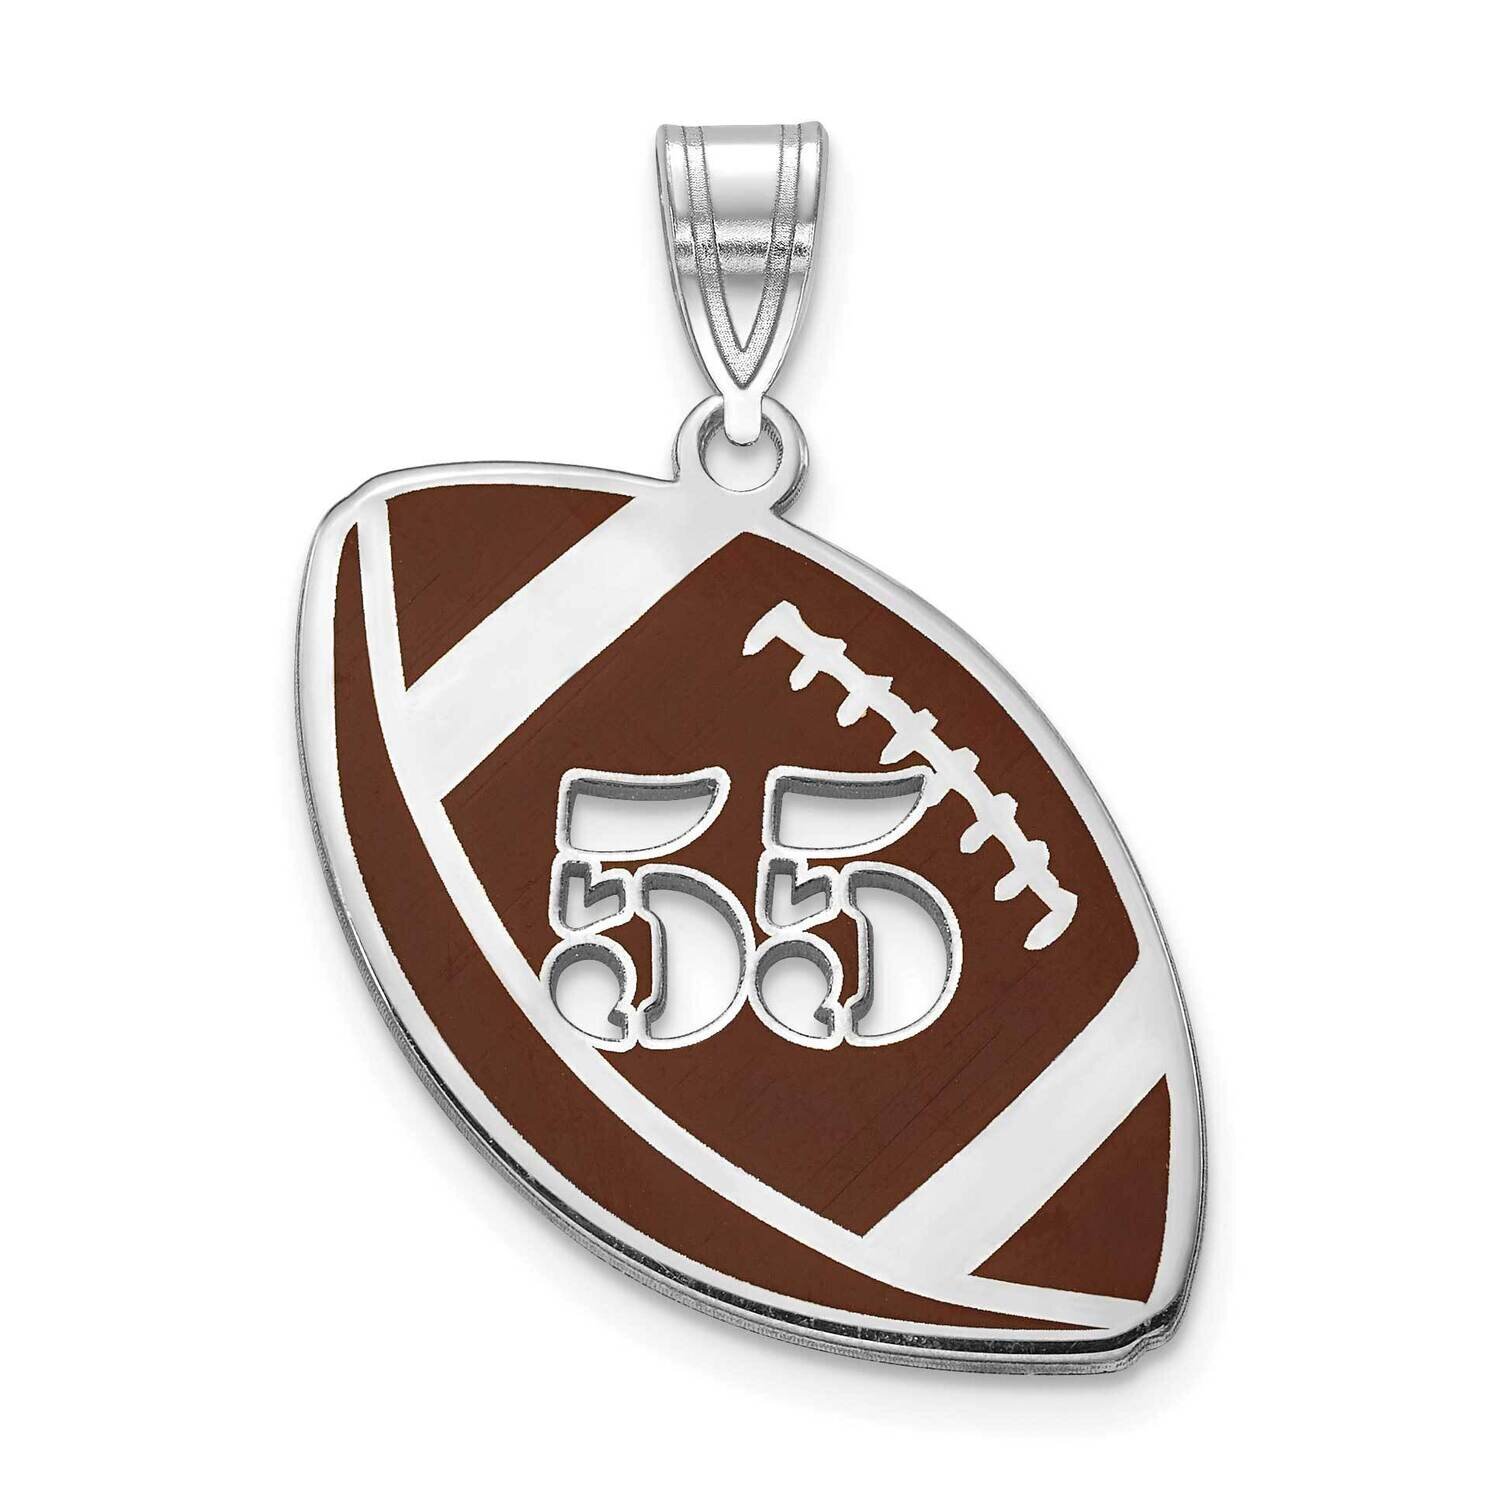 Football Charm with Number 14k White Gold Epoxied XNA928W